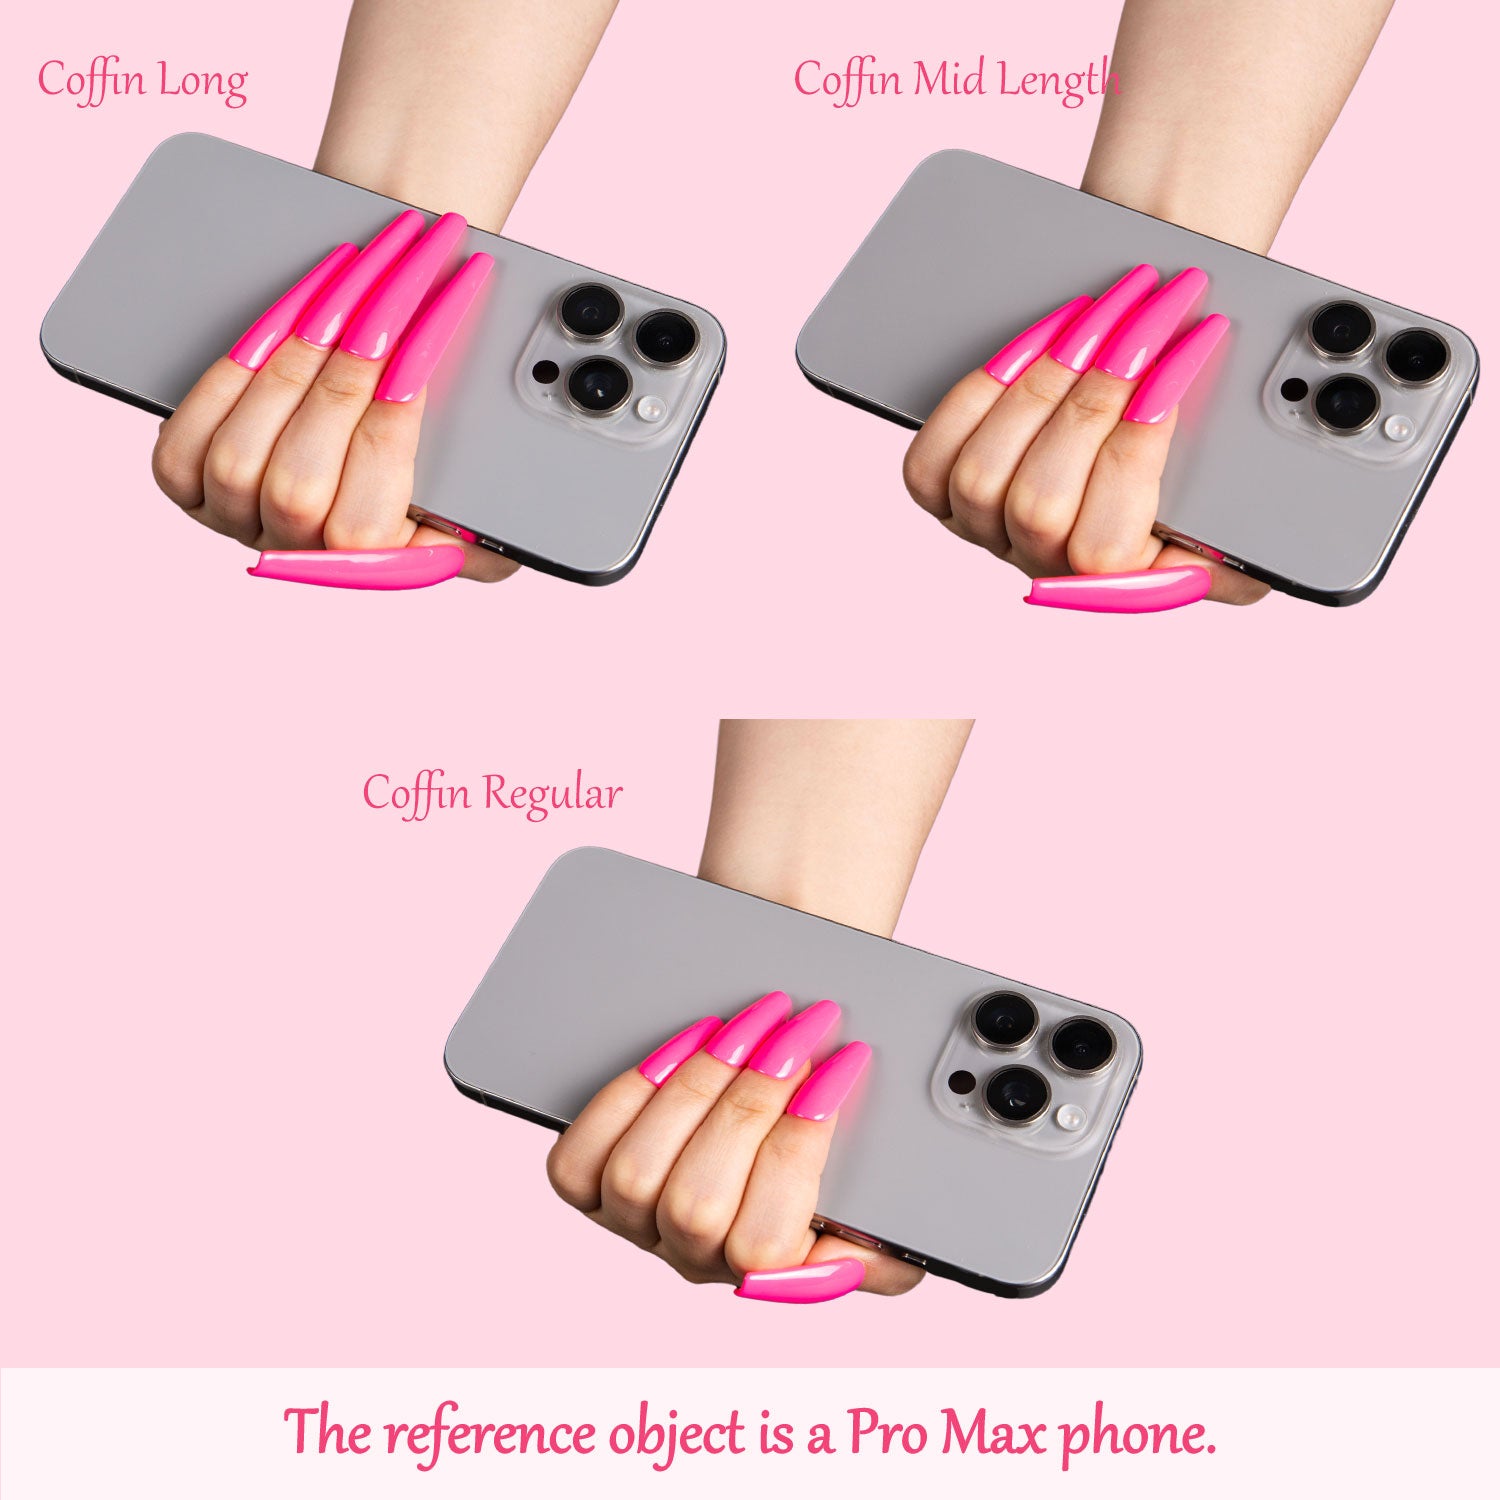 Bright pink coffin-shaped press-on nails in three lengths - Coffin Long, Coffin Mid Length, and Coffin Regular - displayed by a hand holding a Pro Max phone as a reference.